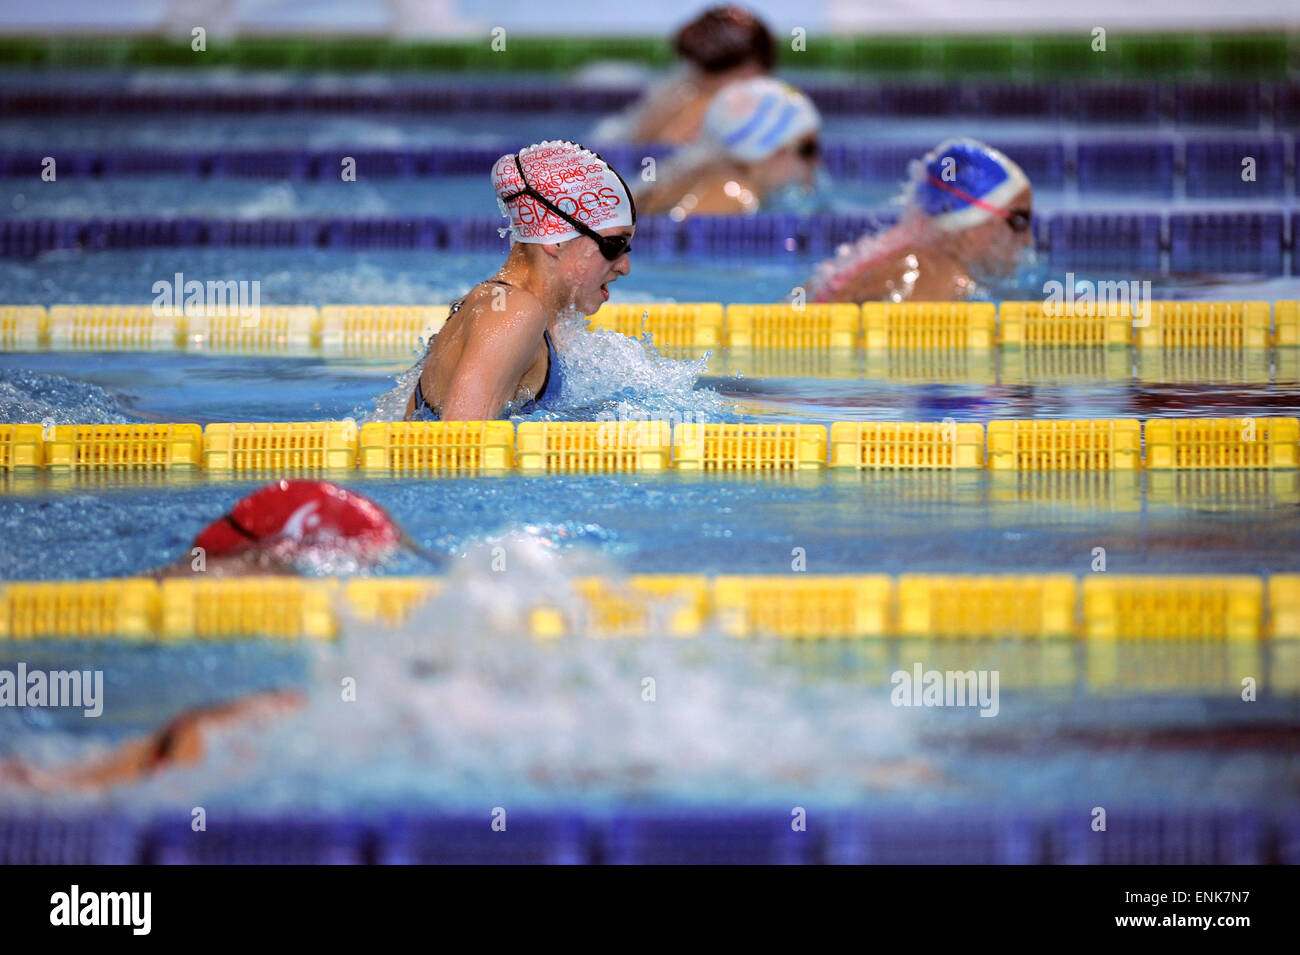 Young women competing during a breaststroke swimming race Stock Photo